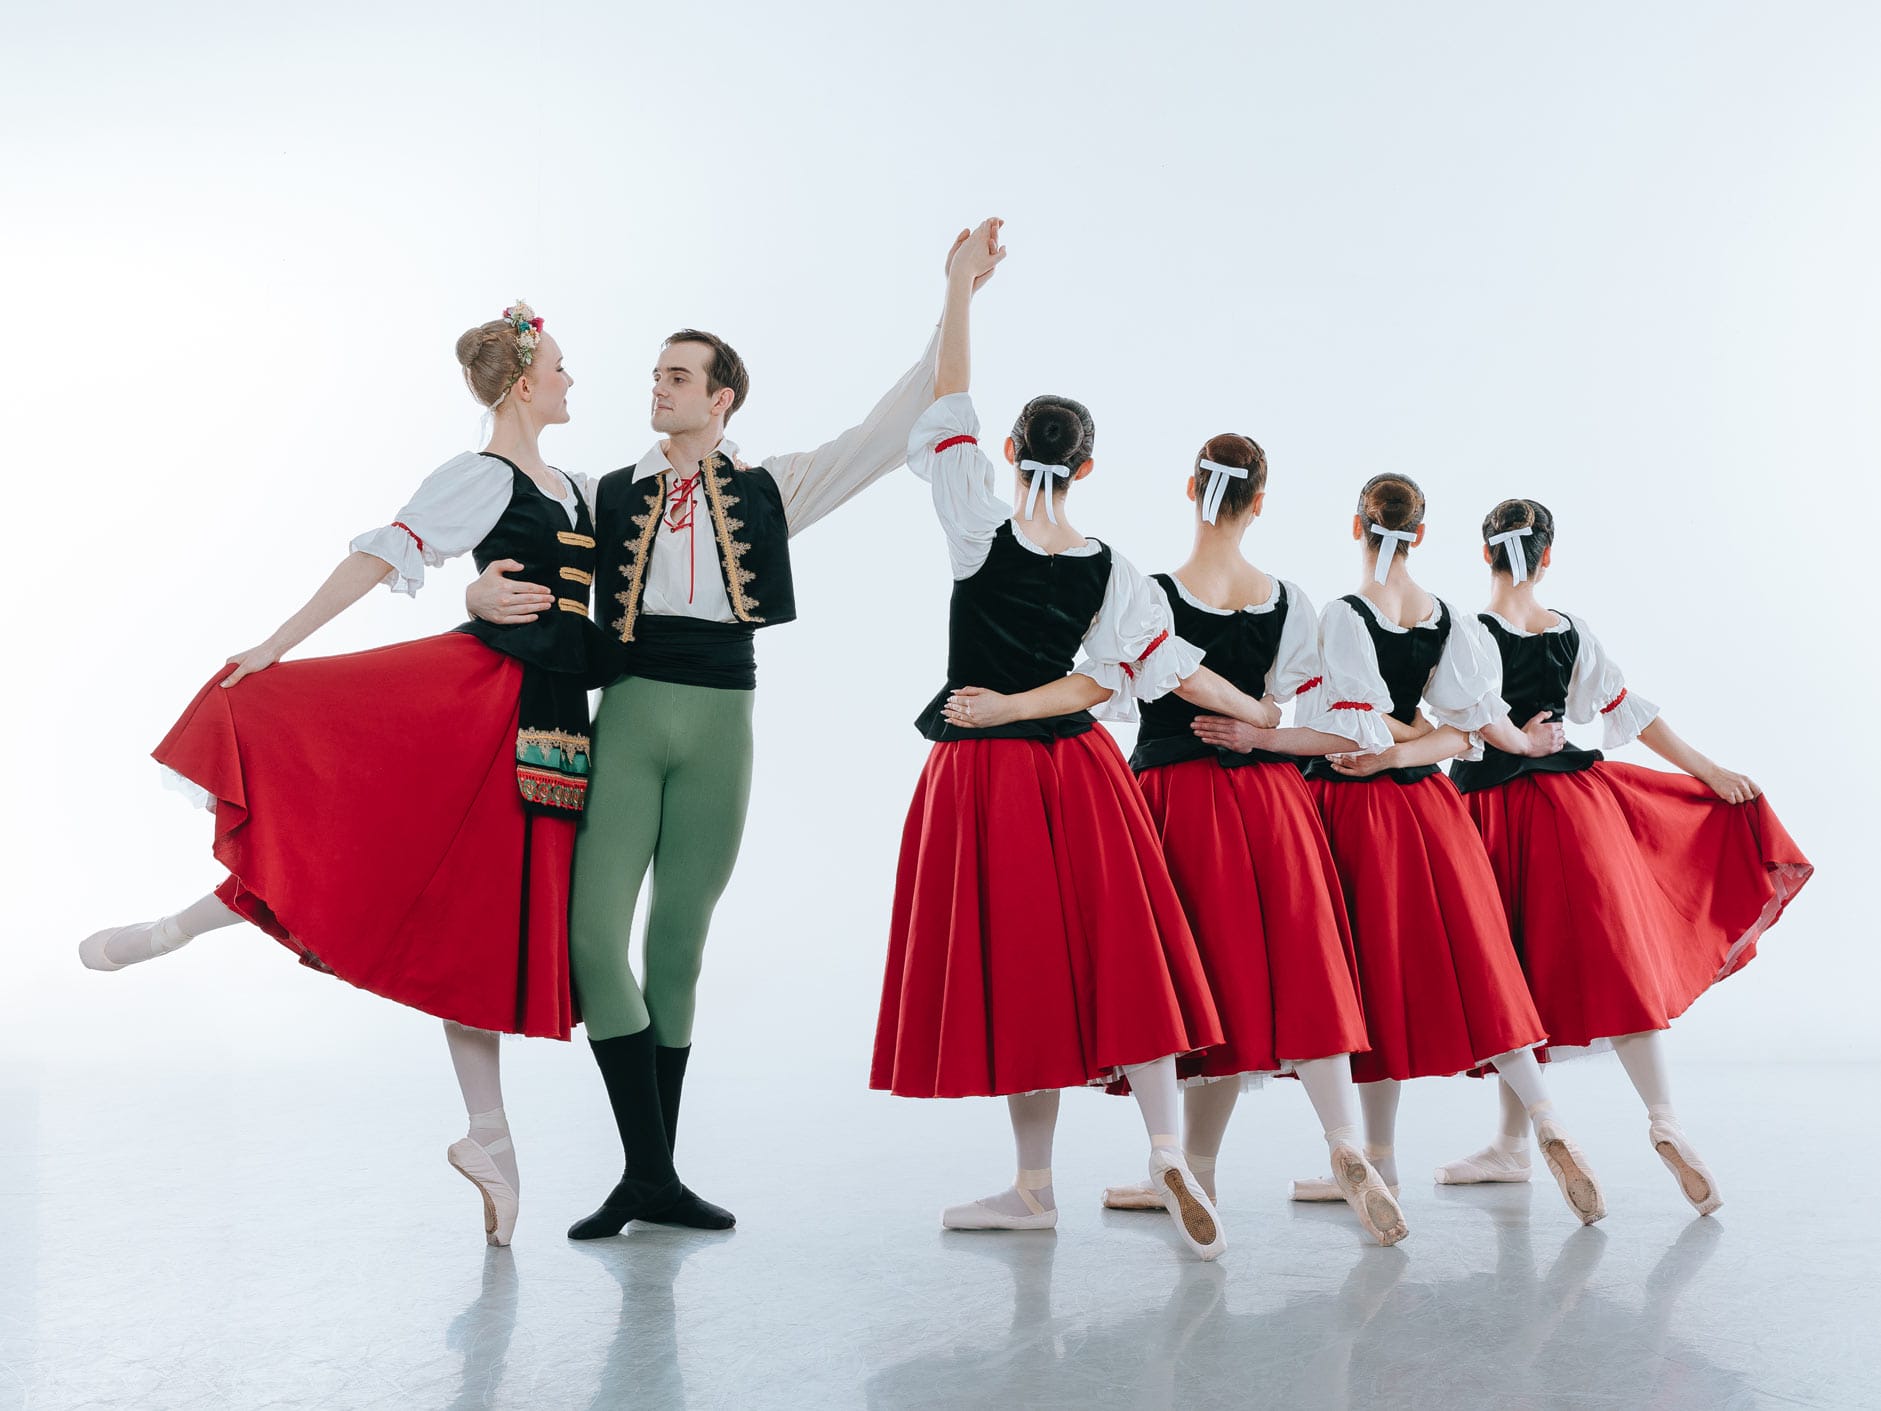 A group of 6 dancers wearing traditional ballet outfits. four female dancers stand with their back to the camera and their arms around each others waists. A female dancer balances en pointe supported by a male dancer.